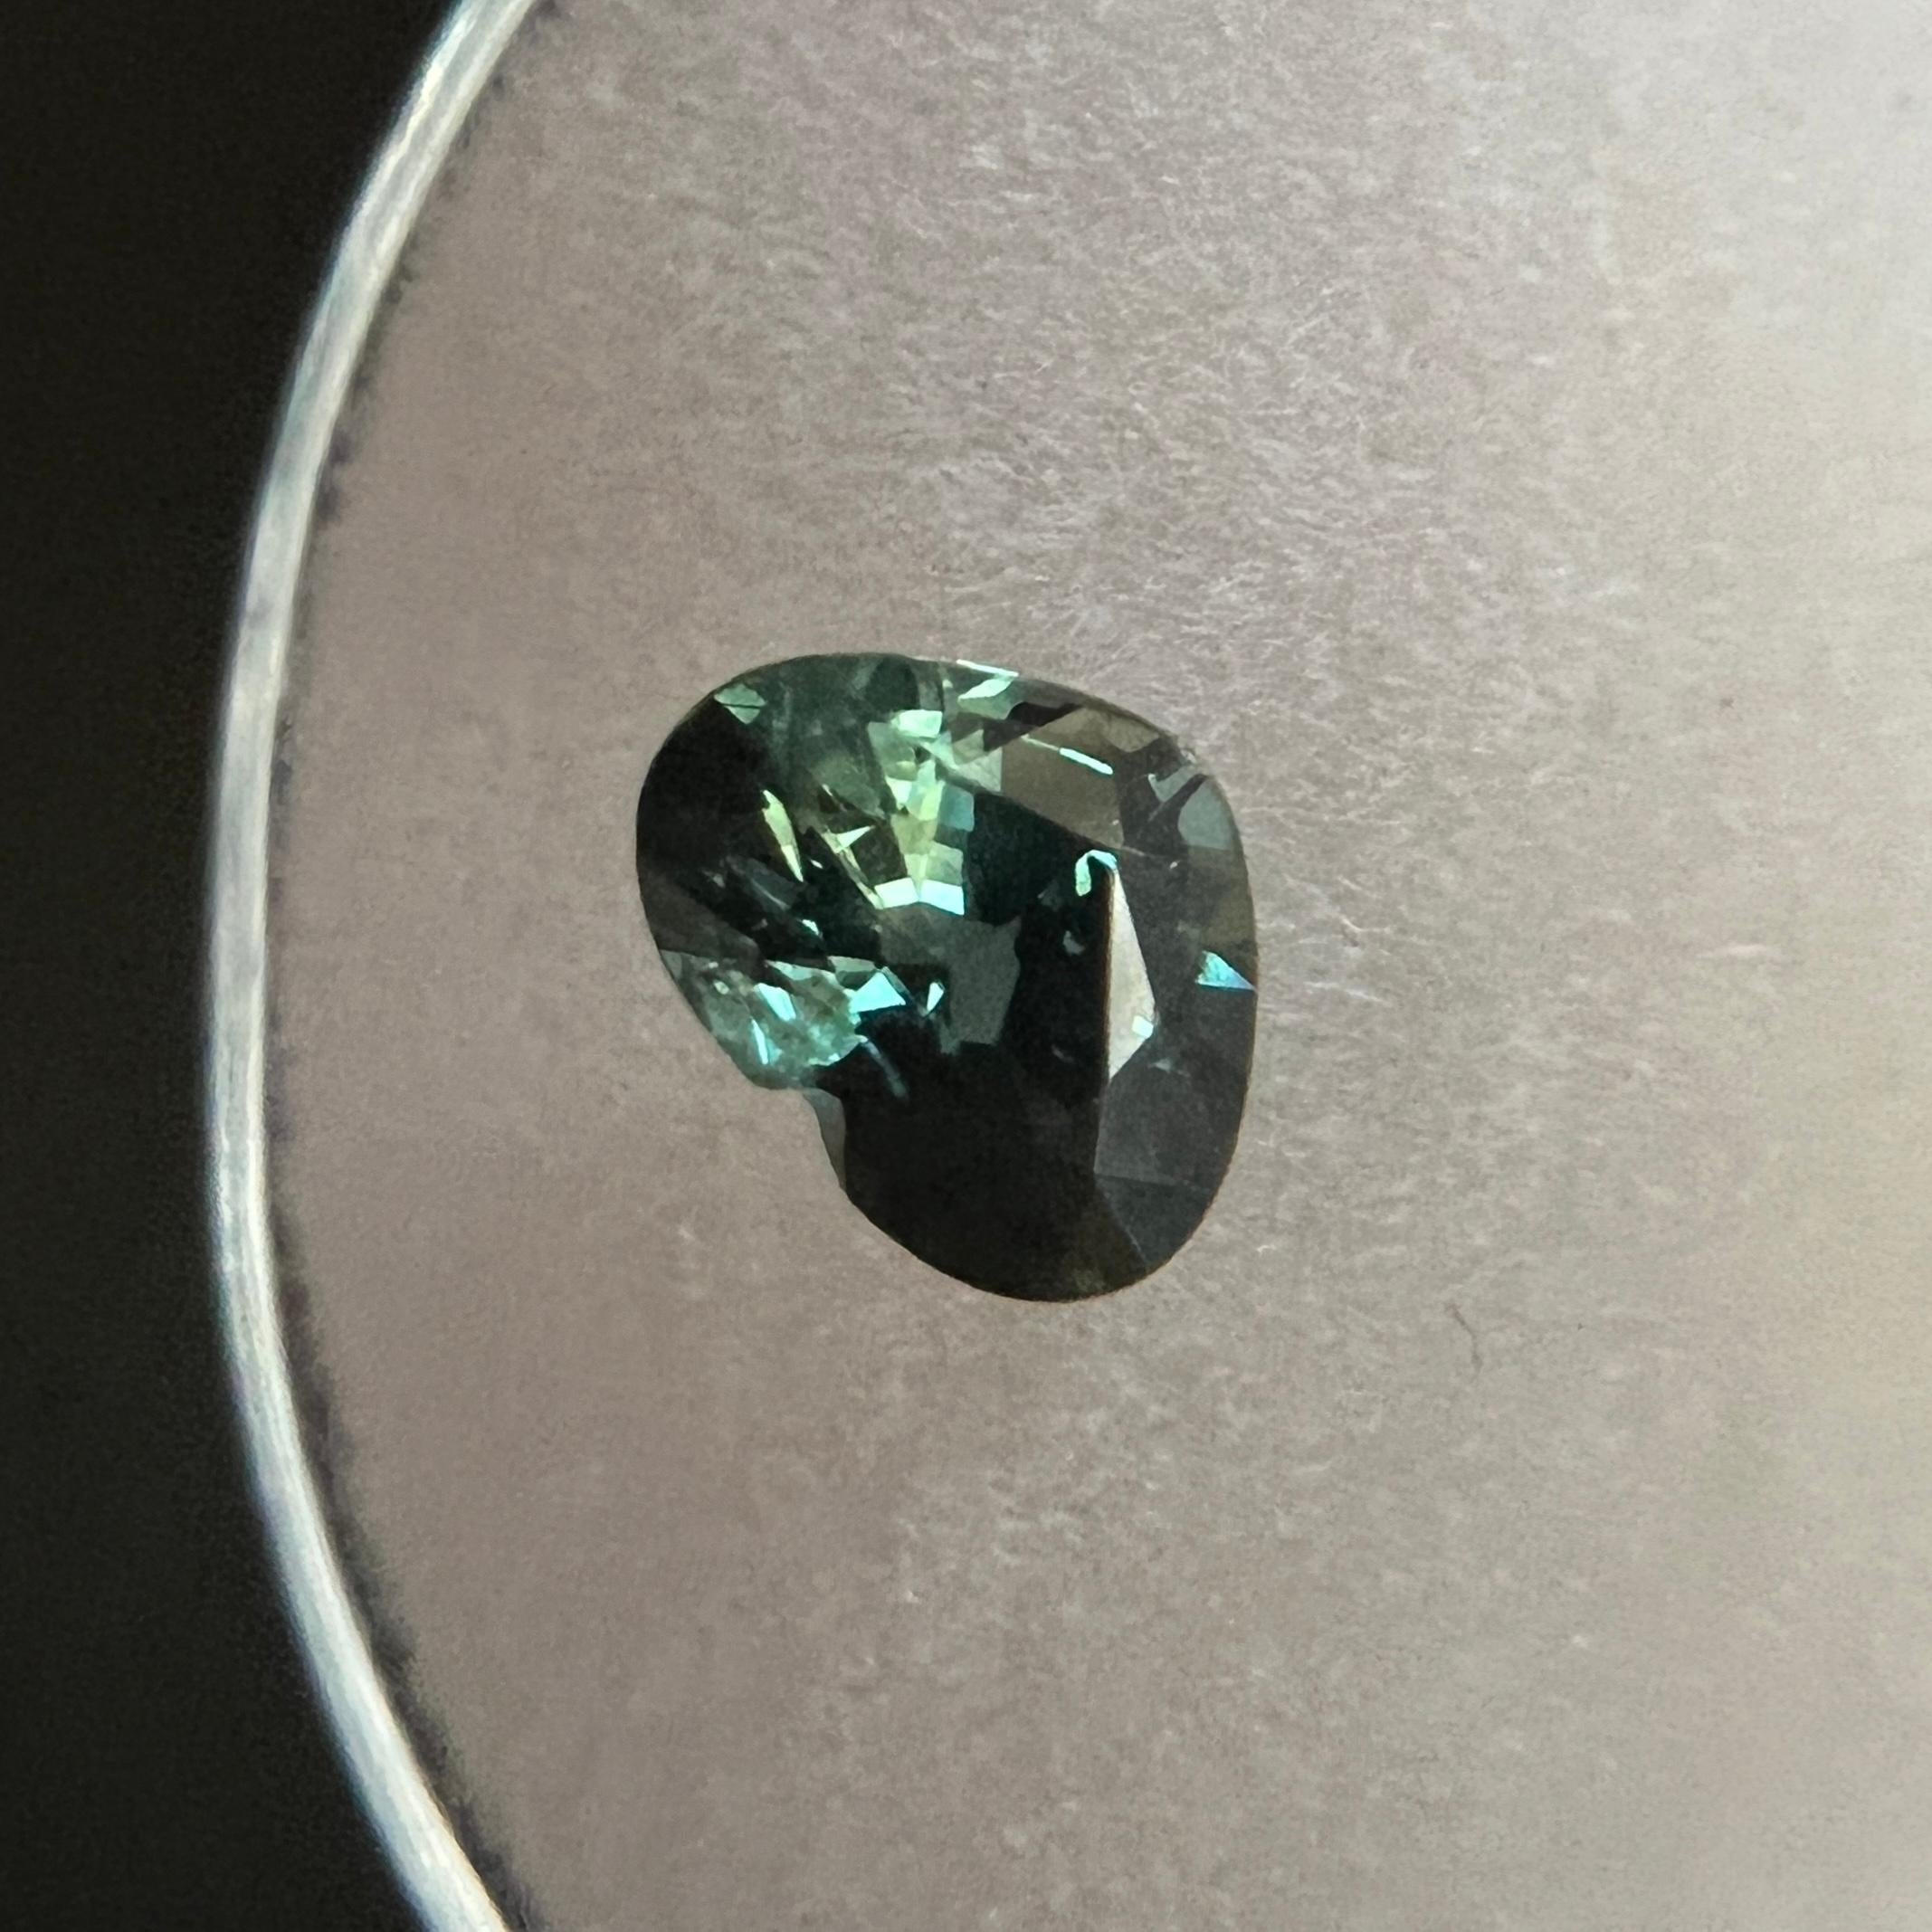 Natural Green Blue Parti-Colour/bi colour Australian Sapphire Gem.

0.91 Carat with a beautiful and unique green blue bi colour. Very rare and stunning to see.

Has good clarity, a clean stone with only some small natural inclusions visible when